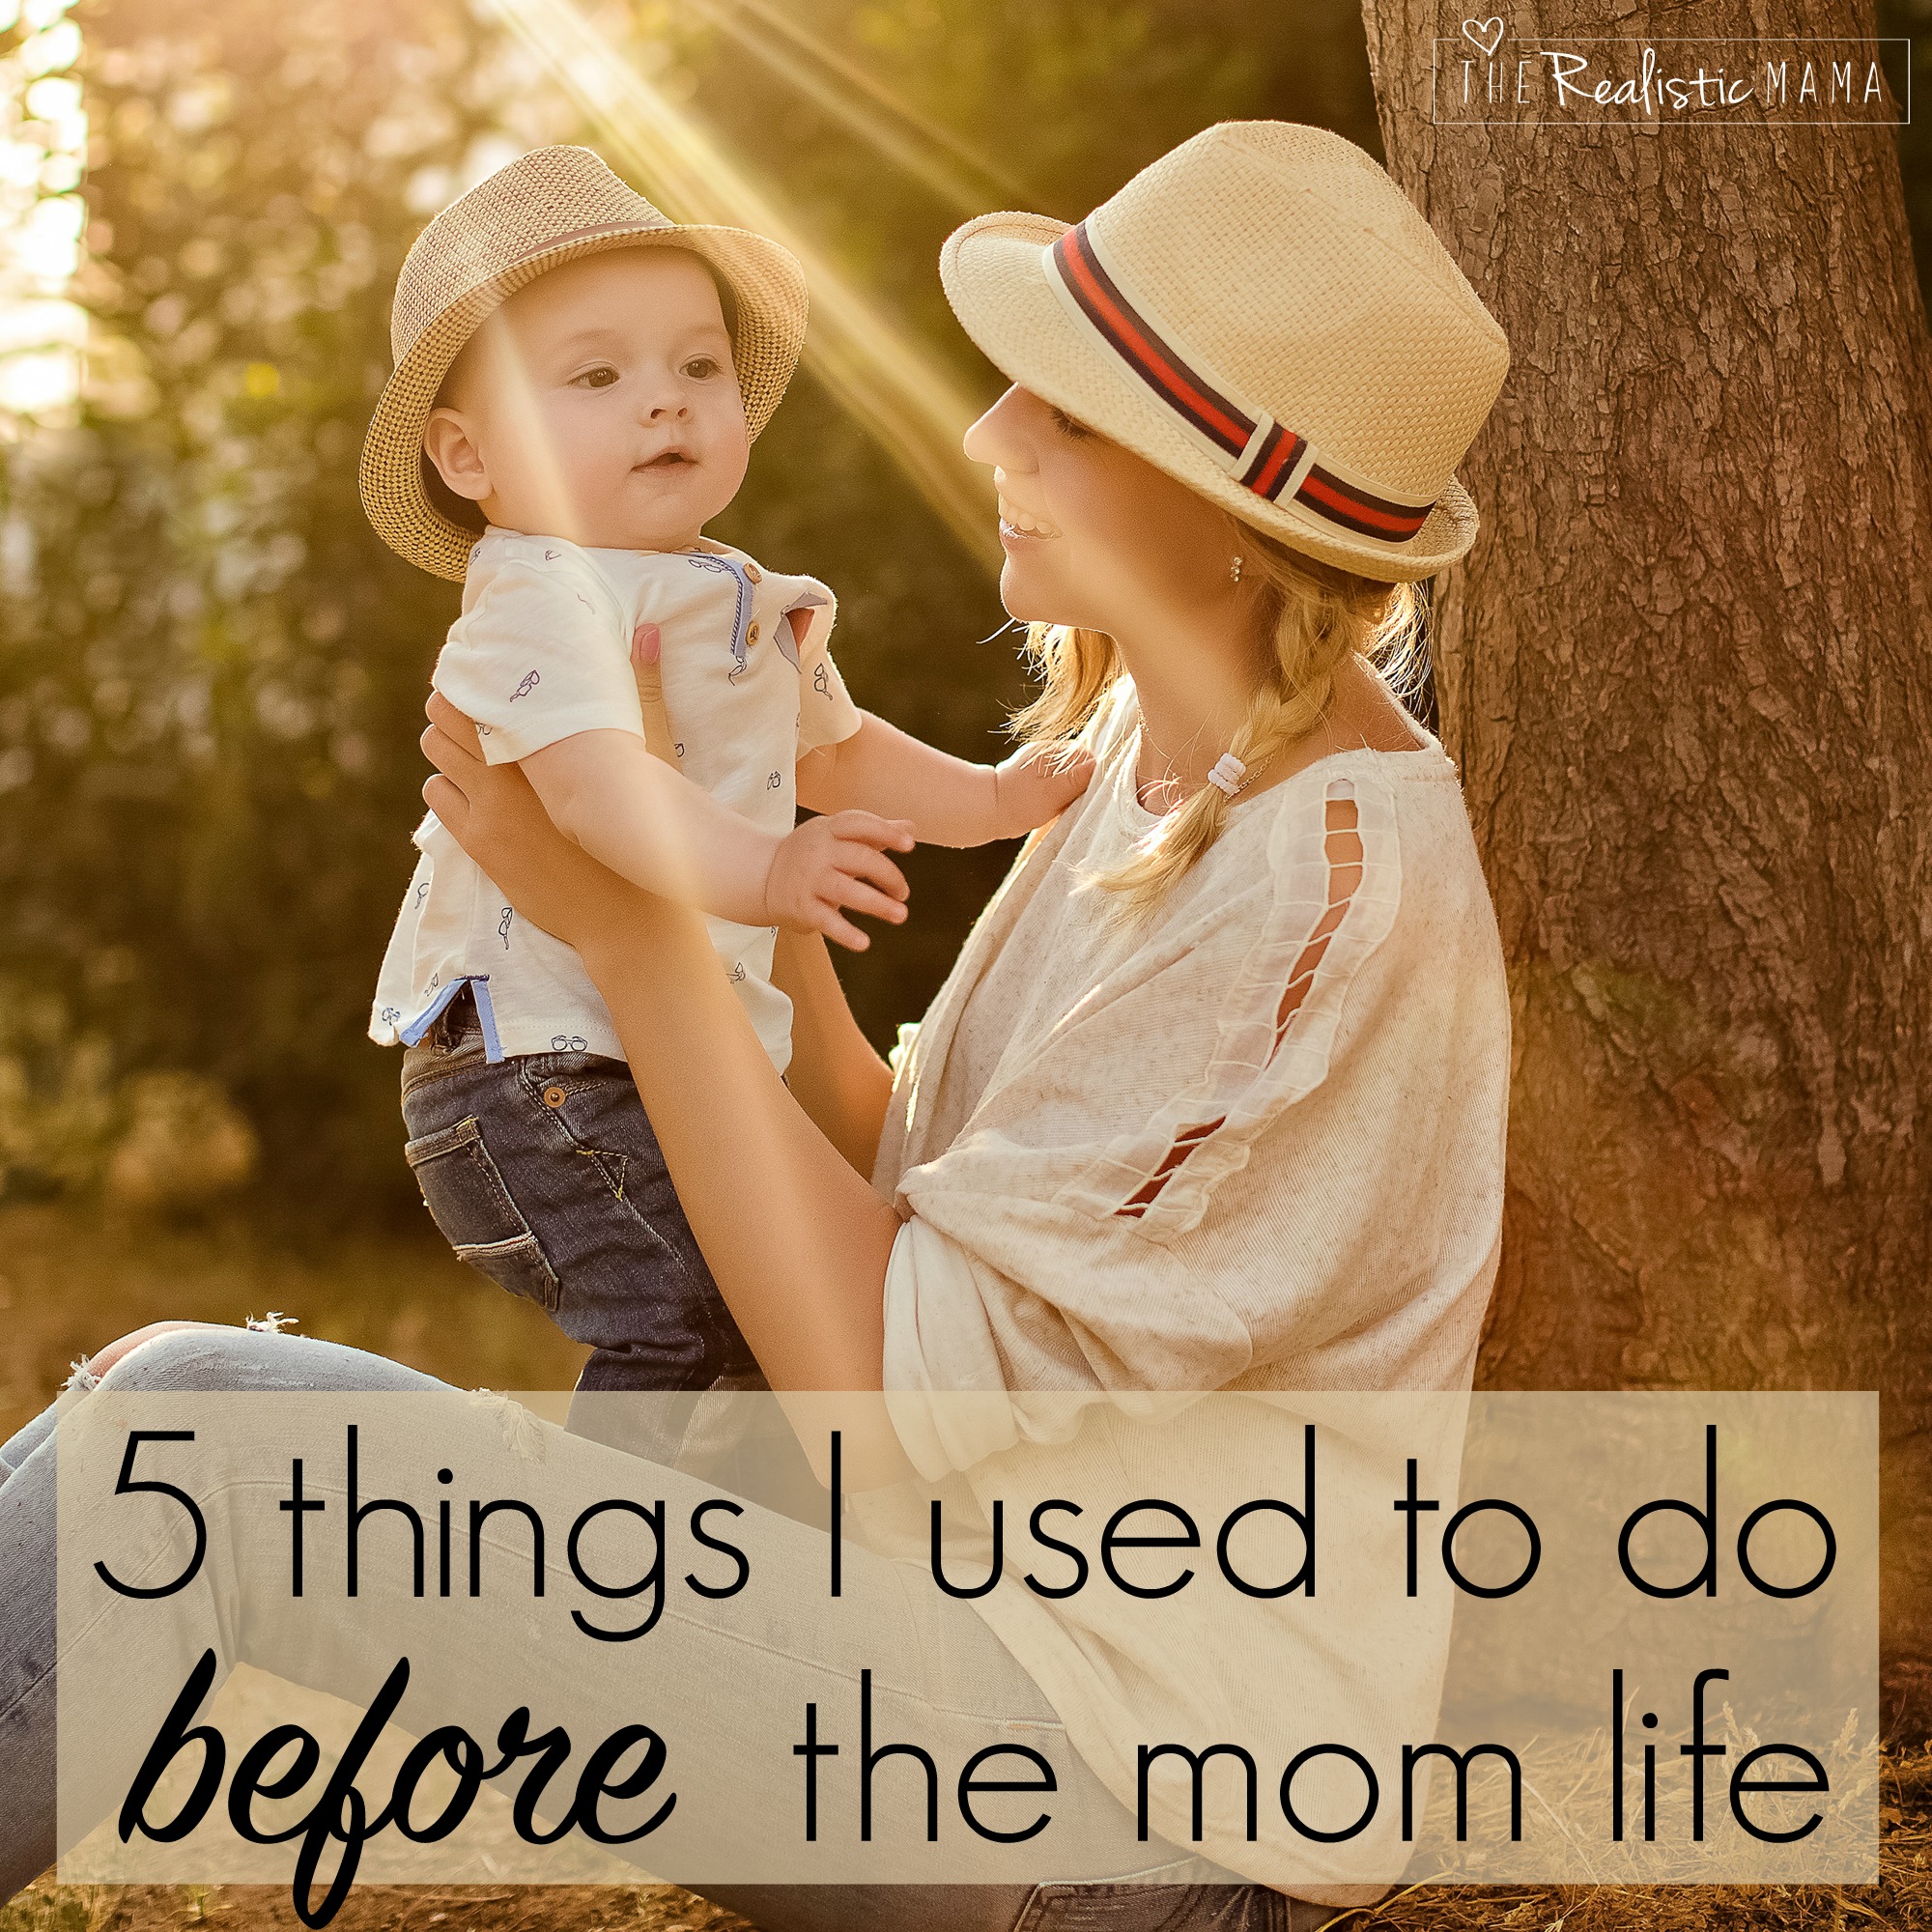 Things I used to do before the mom life